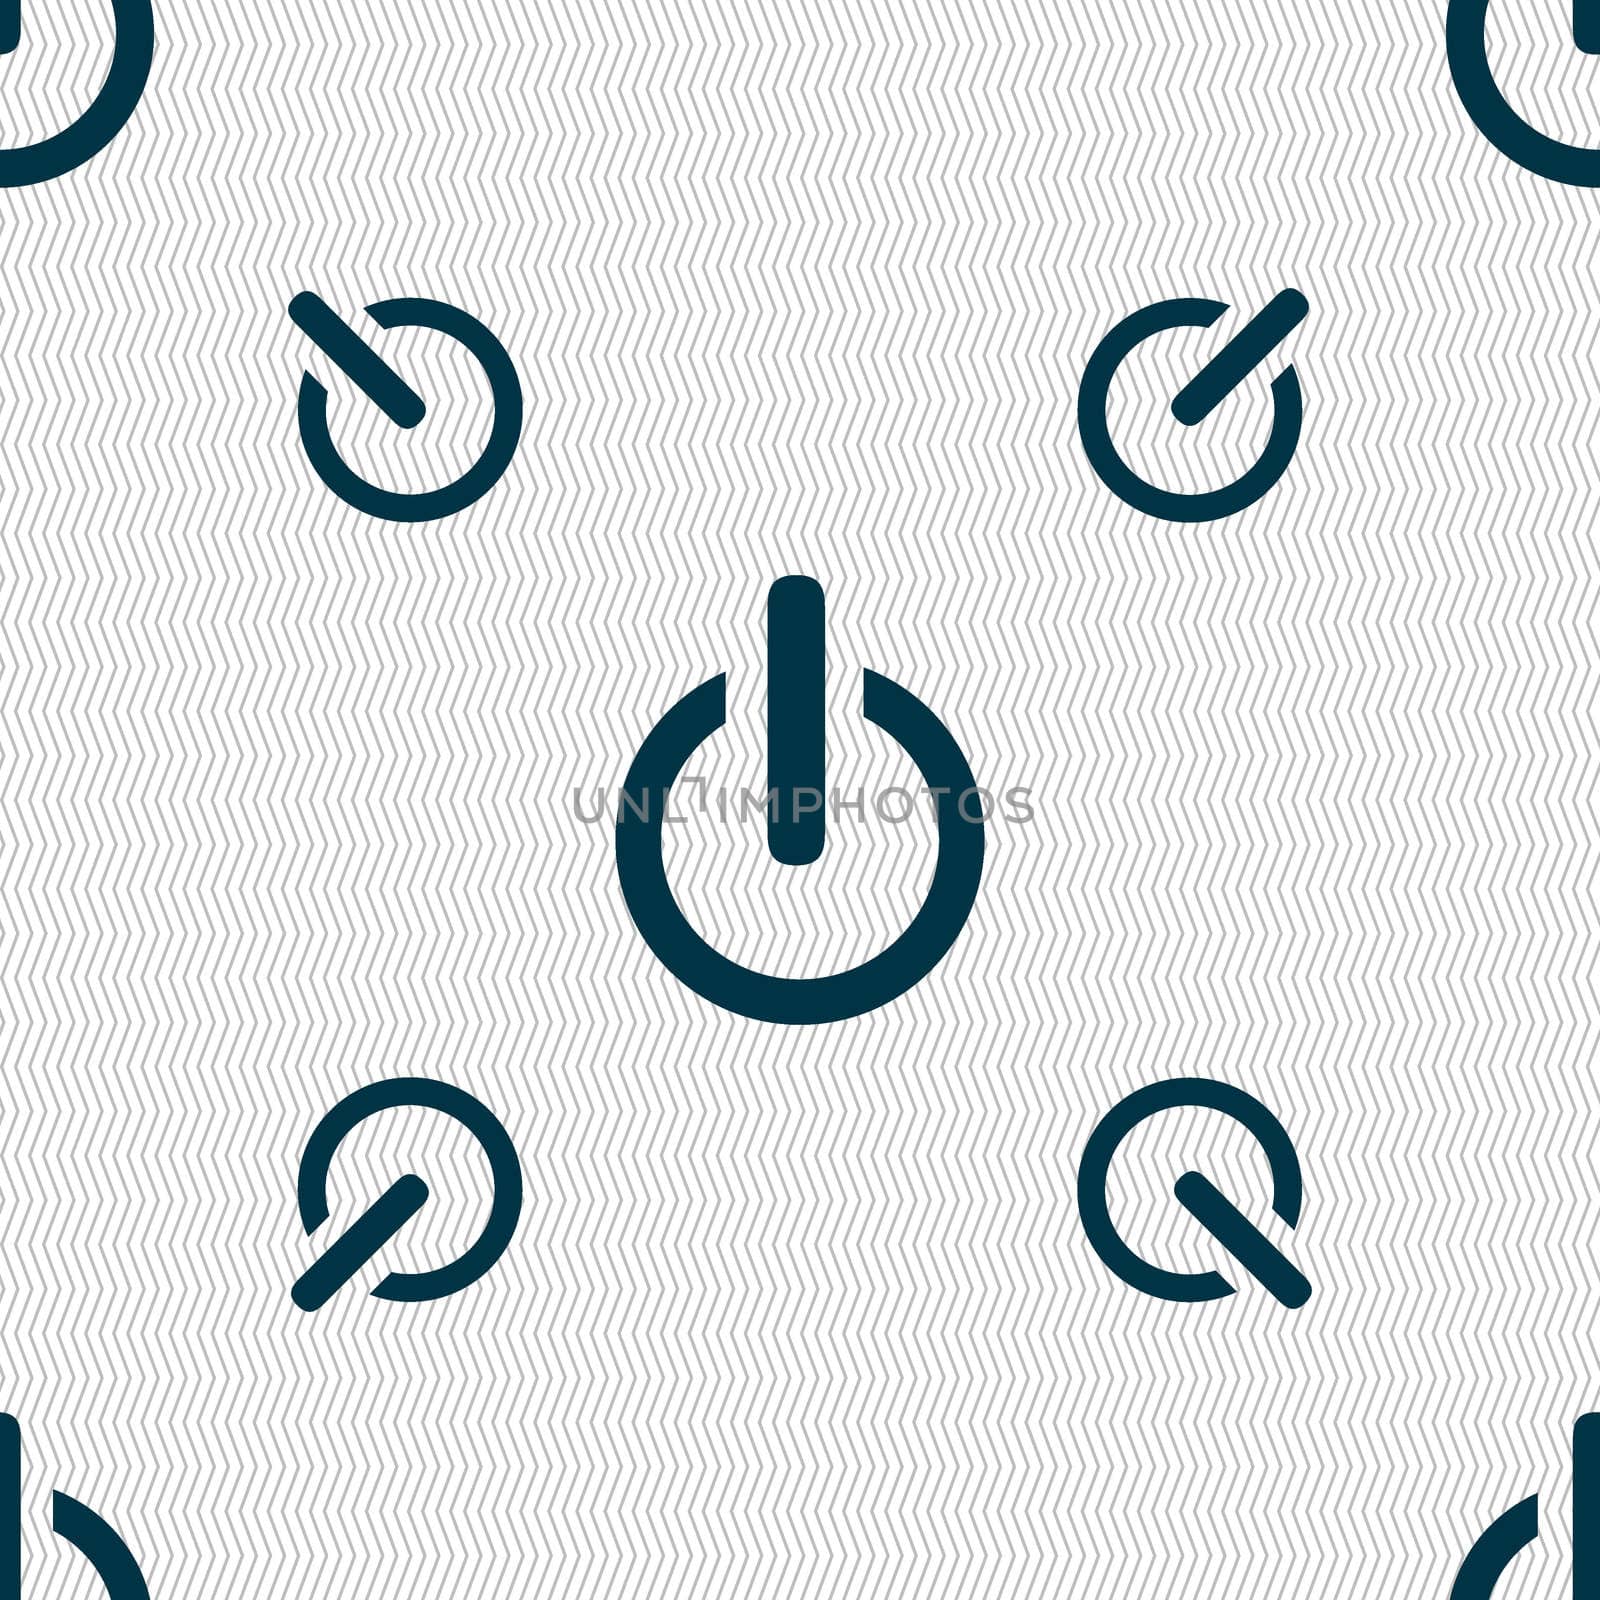 Power sign icon. Switch on symbol. Seamless pattern with geometric texture. illustration